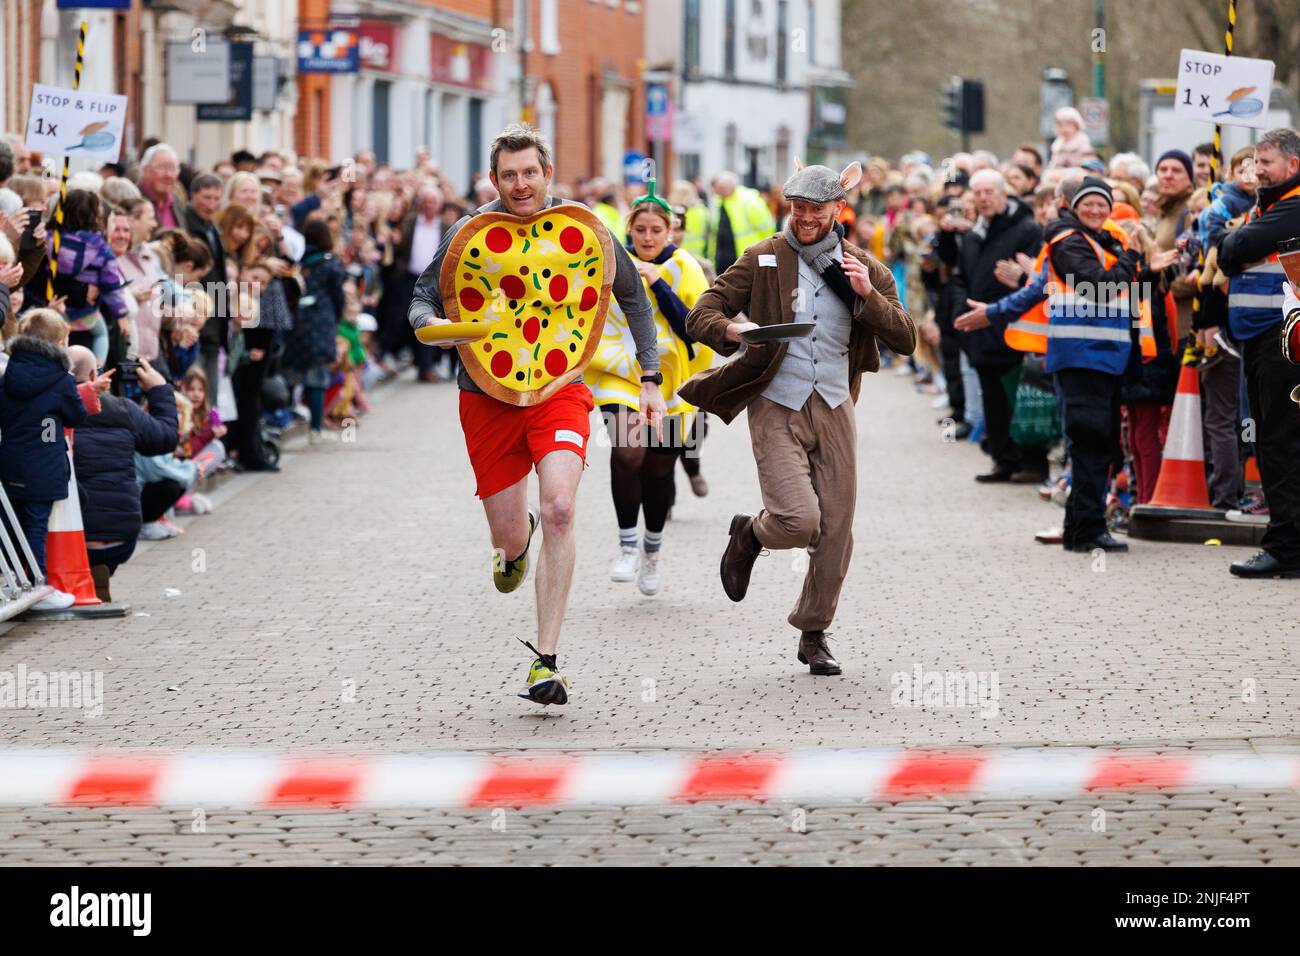 The annual Shrove Tuesday pancake race held in Lichfield, Staffordshire, England. The event comprises of childrens races, a mascot race and male and female races. The event starts at noon and is compered by the town crier and judged by he Lord Mayor. Pictured left, wearing pancake, winner of the mascot fun event Austin Brauser from the WIP running club. Stock Photo